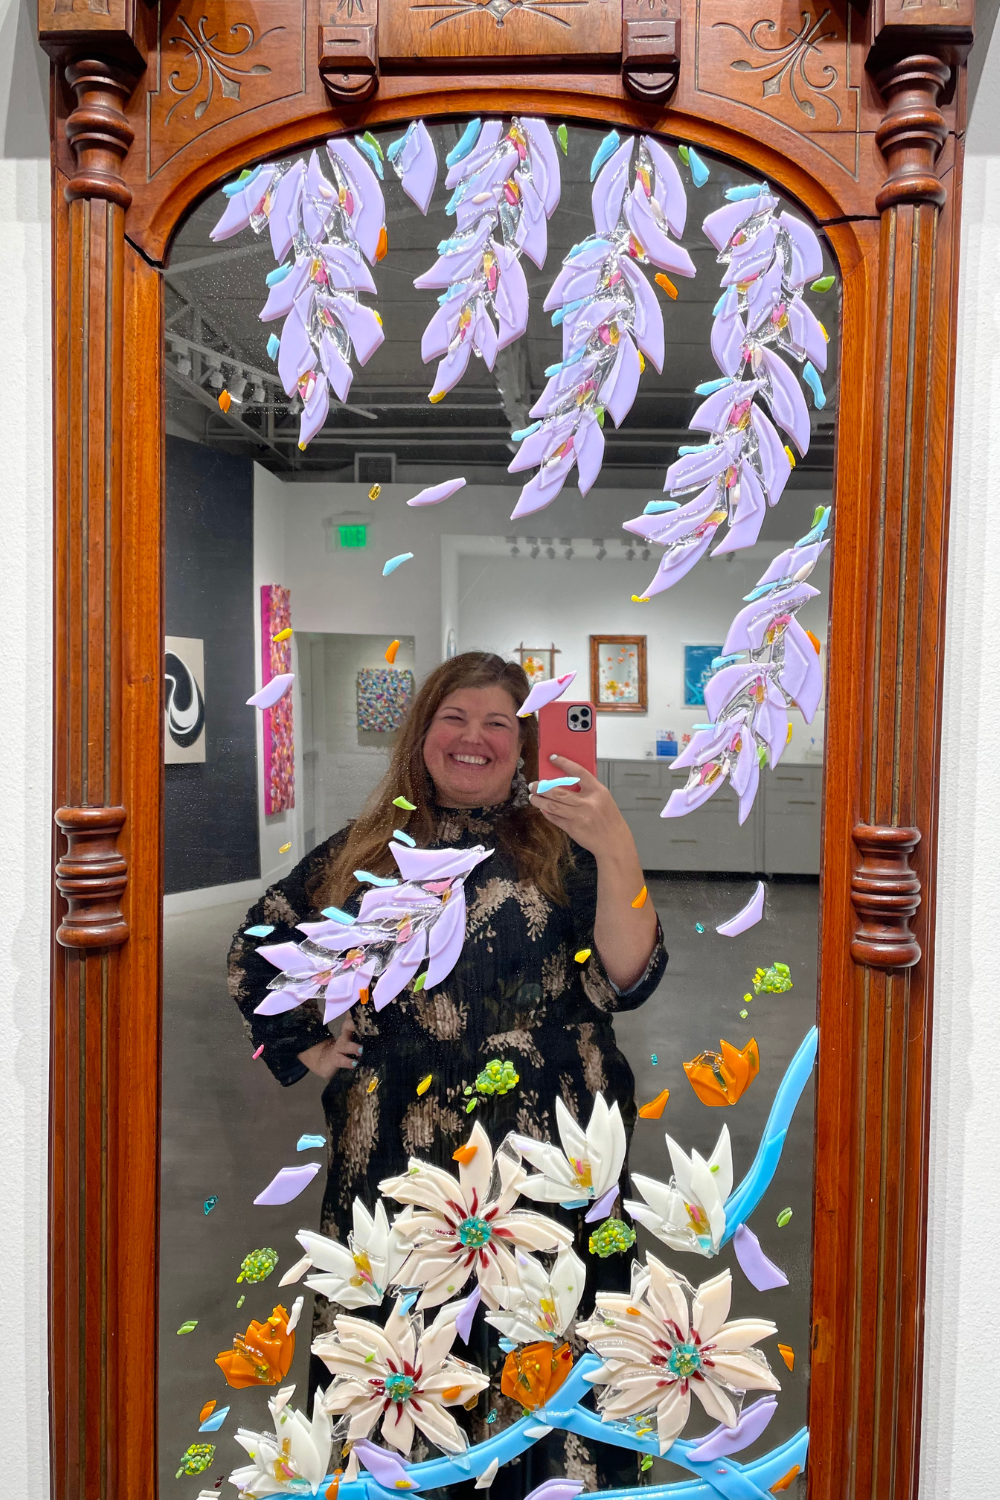 Glass fused flowers on a vintage mirror with Anna Lou Curnes, Glass Artist, reflected in the mirror.